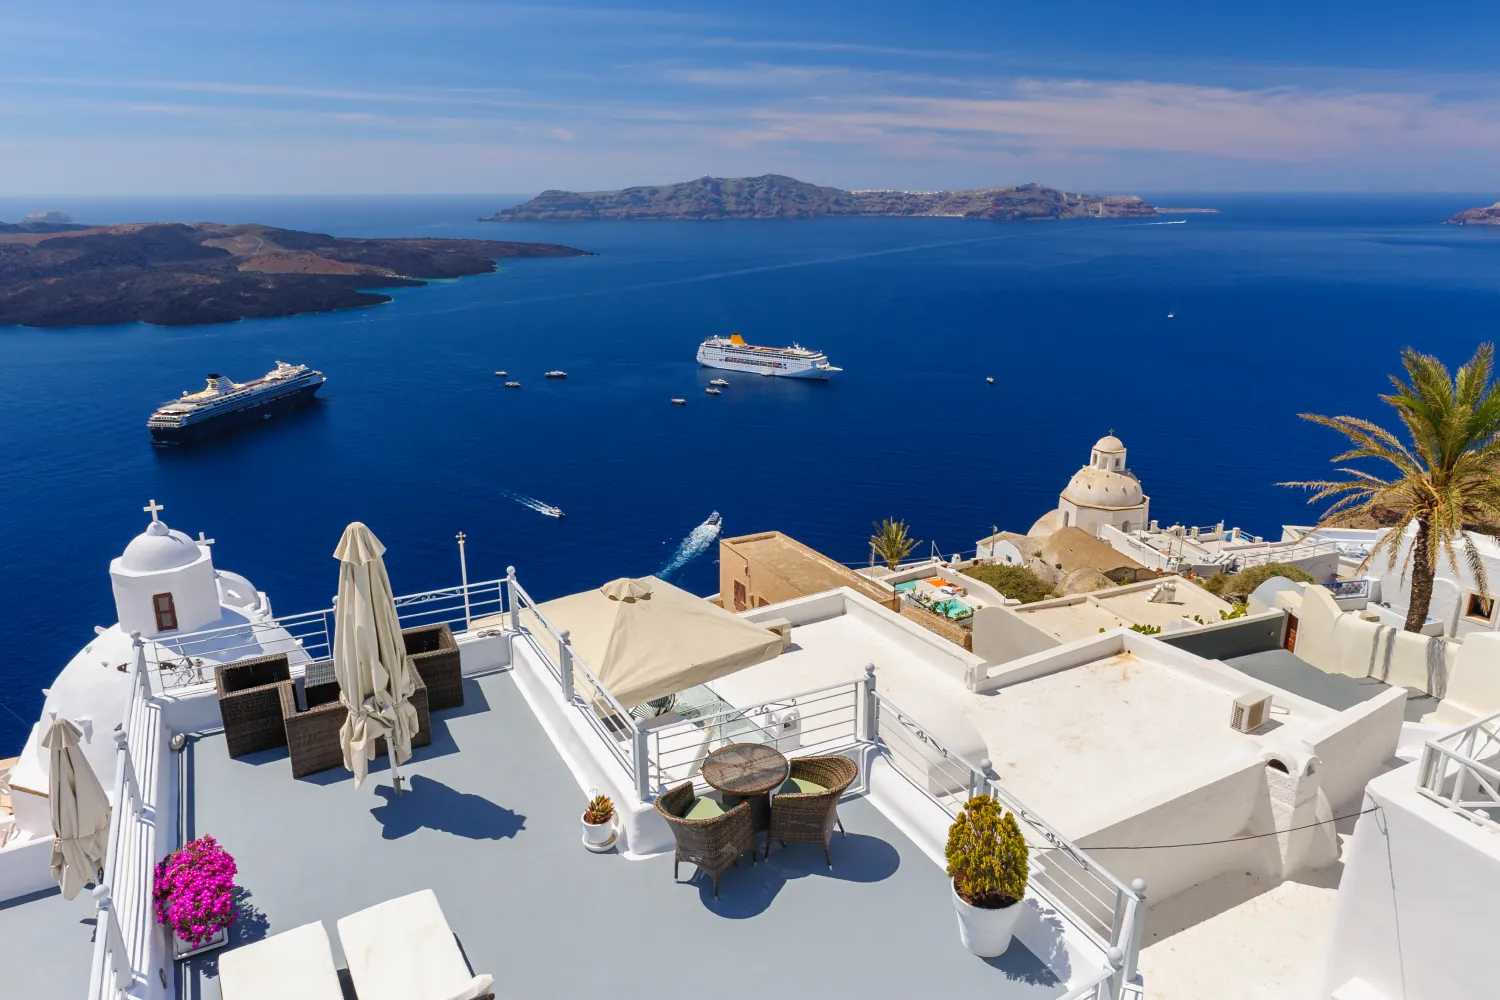 View of the caldera and cruise ships from a hotel's terrace